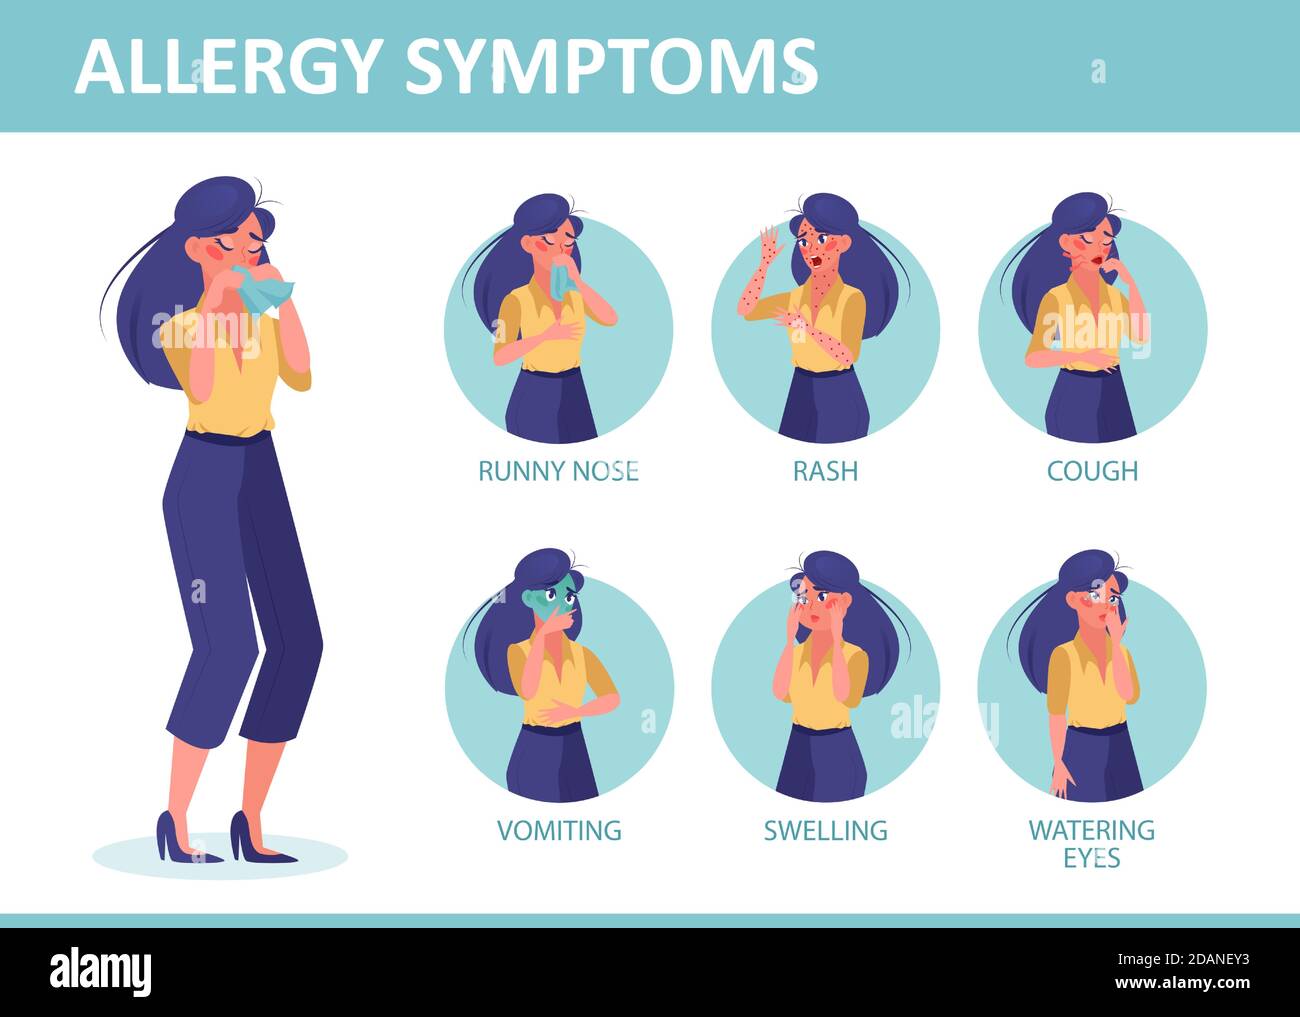 Allergy symptoms infographic. Vector of a woman with allergy symptoms Stock Vector